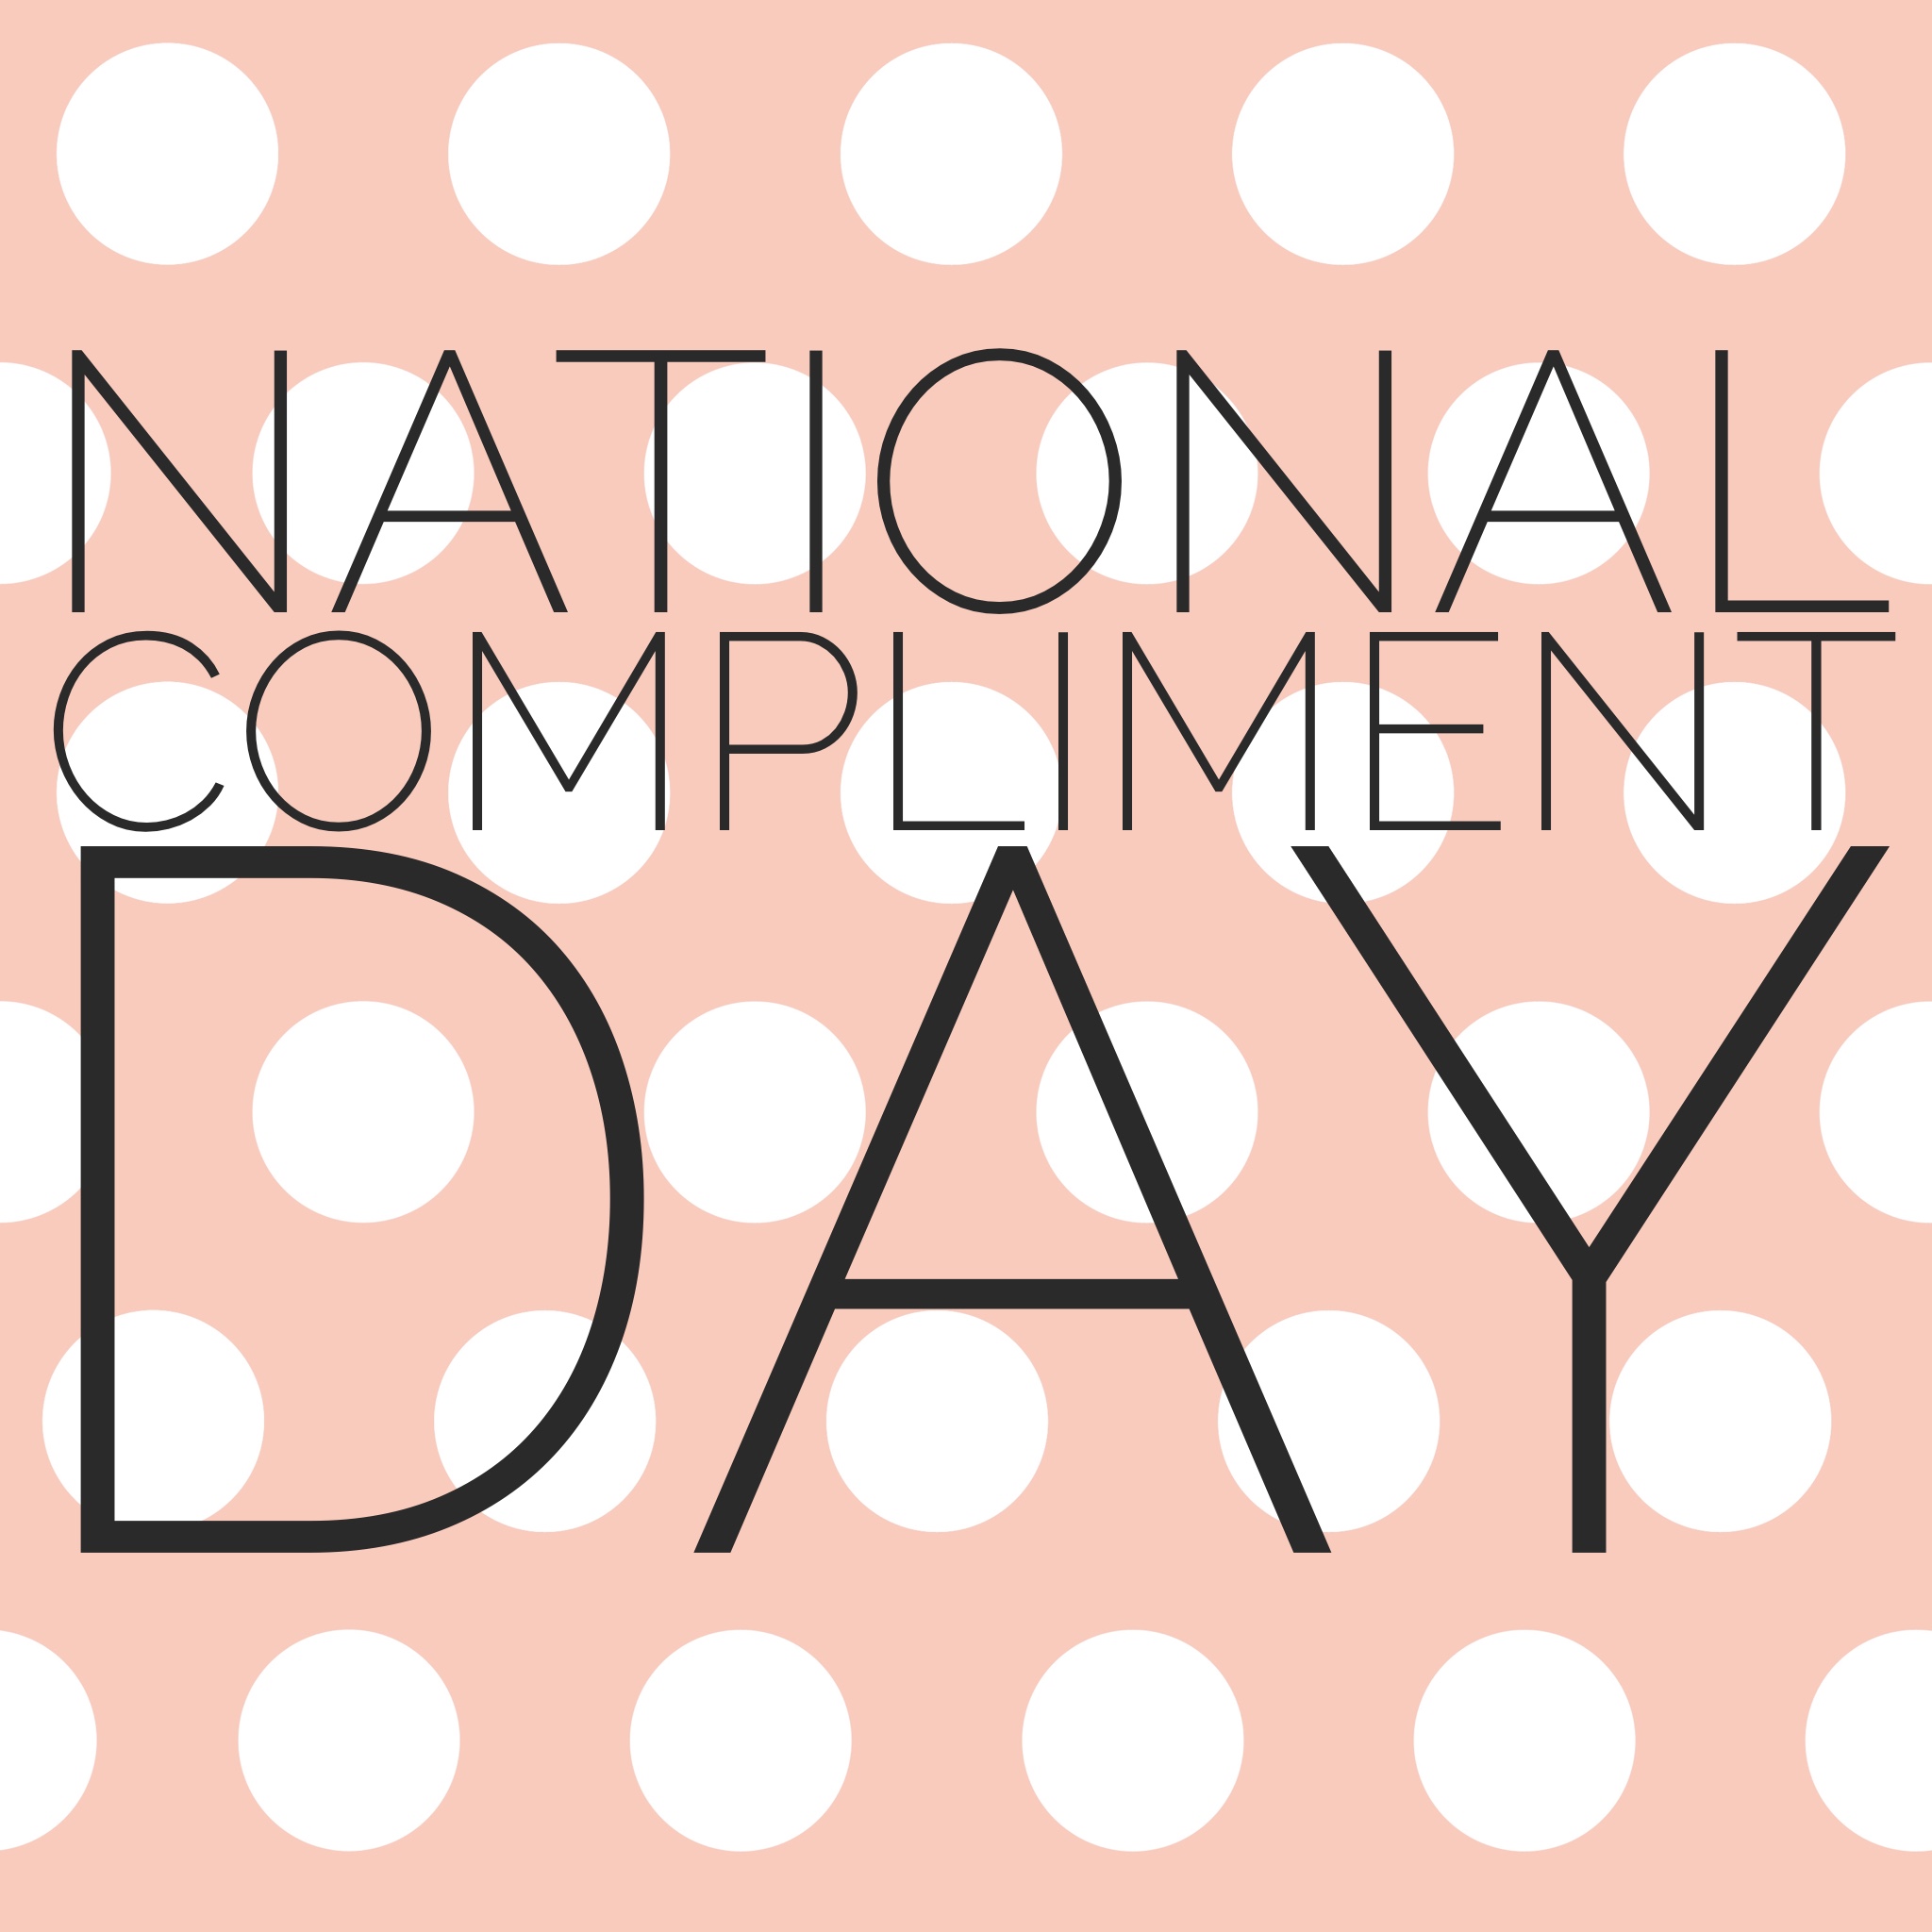 National Compliment Day.